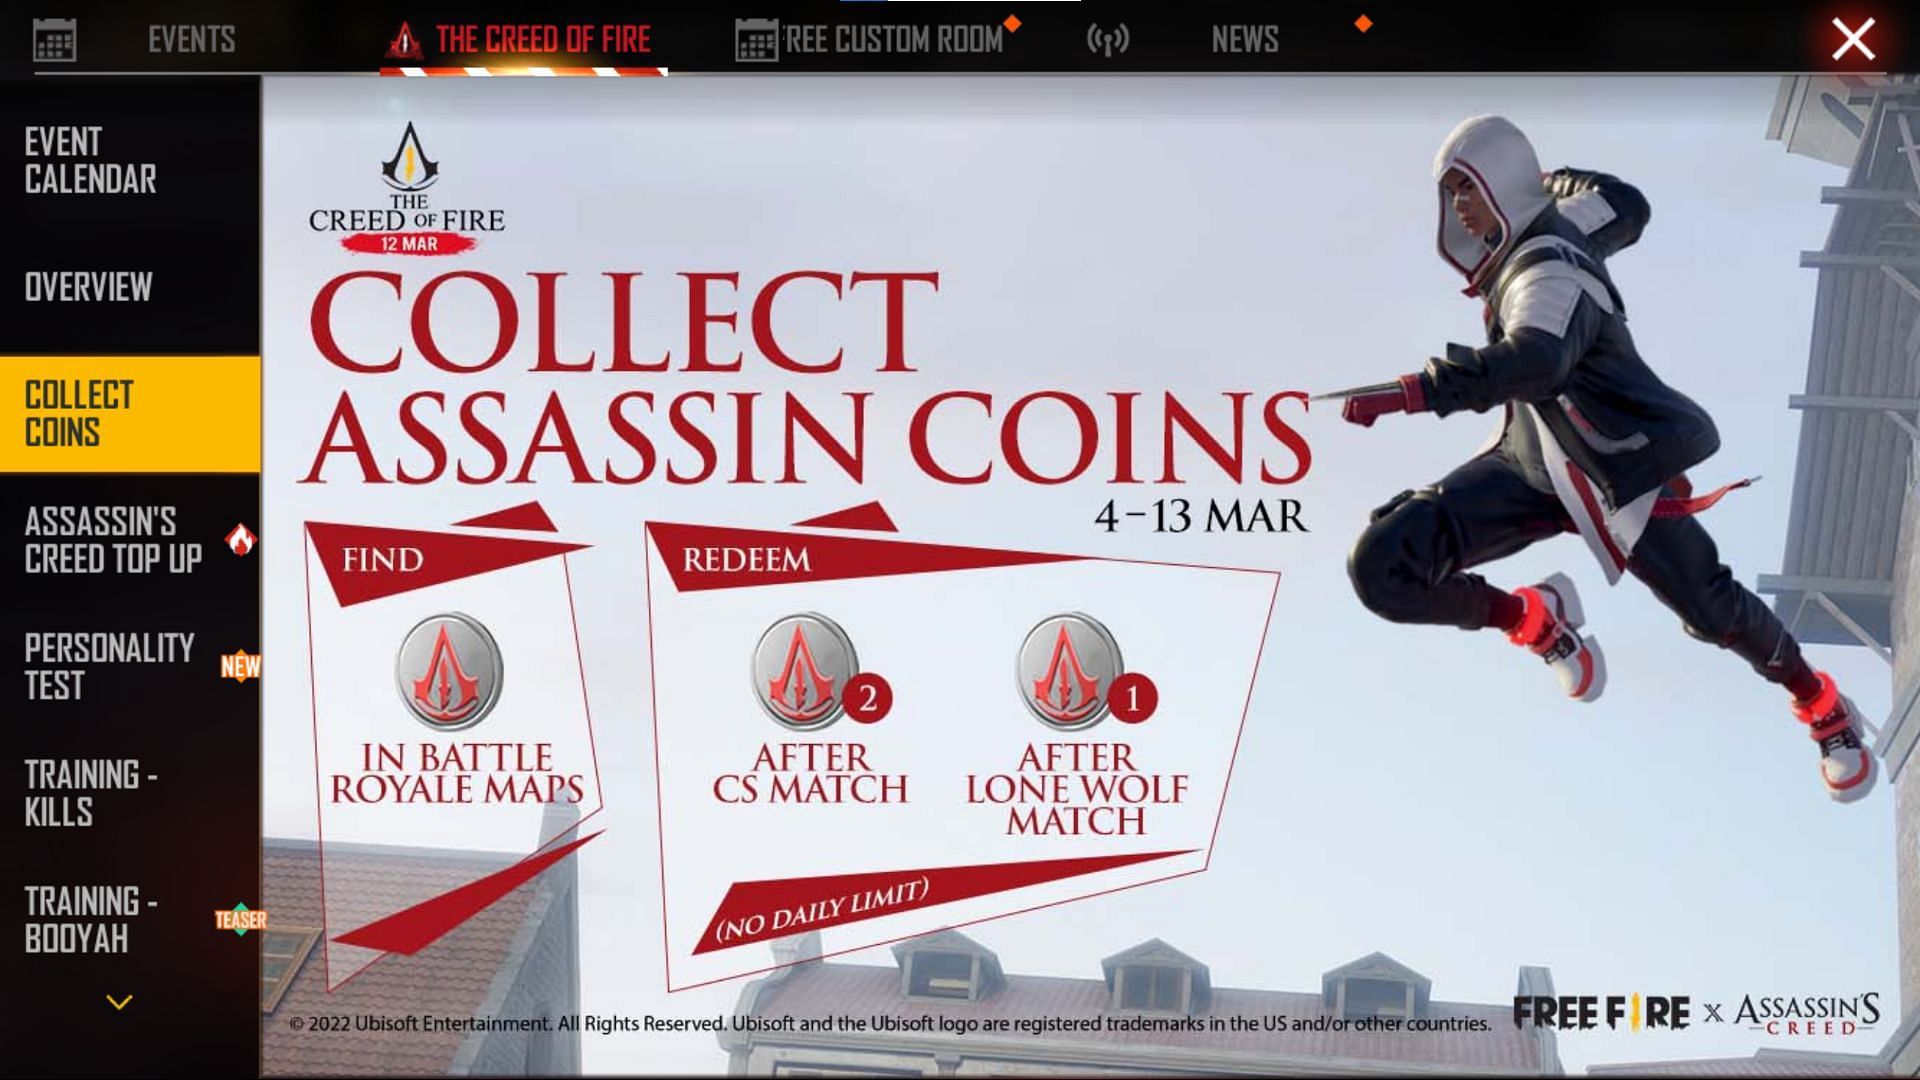 The coins can also be obtained in-game (Image via Garena)